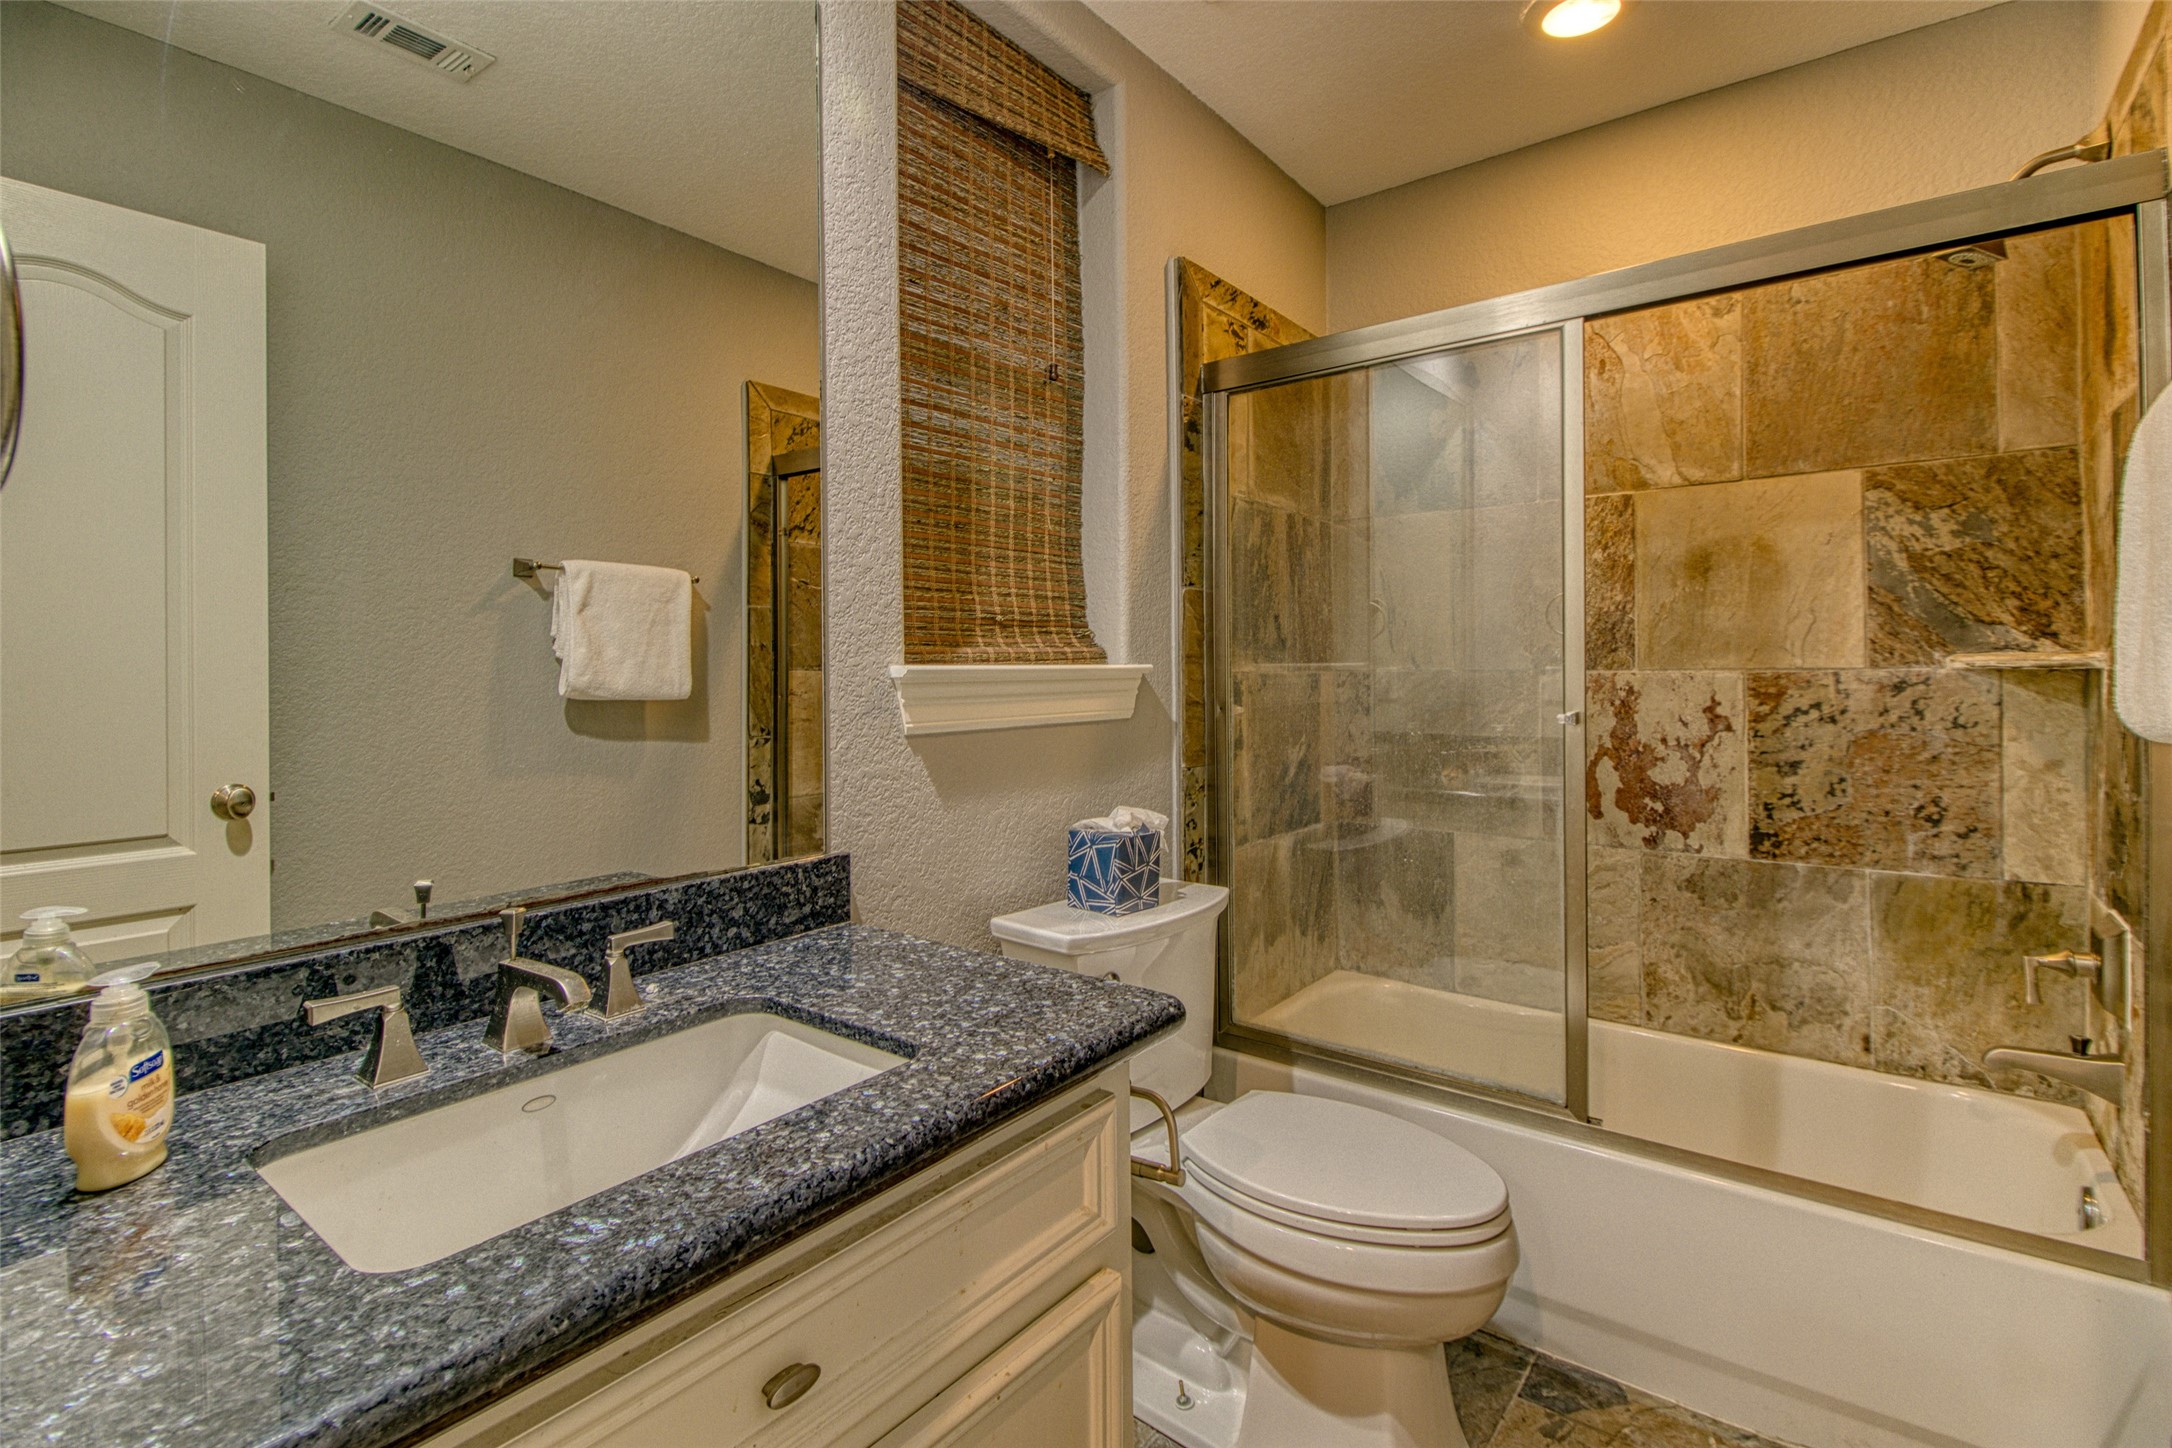 The first-floor guest bathroom features slate floors and shower surround and shimmering granite countertop with undermount sink - an inviting and luxurious space for any guest.